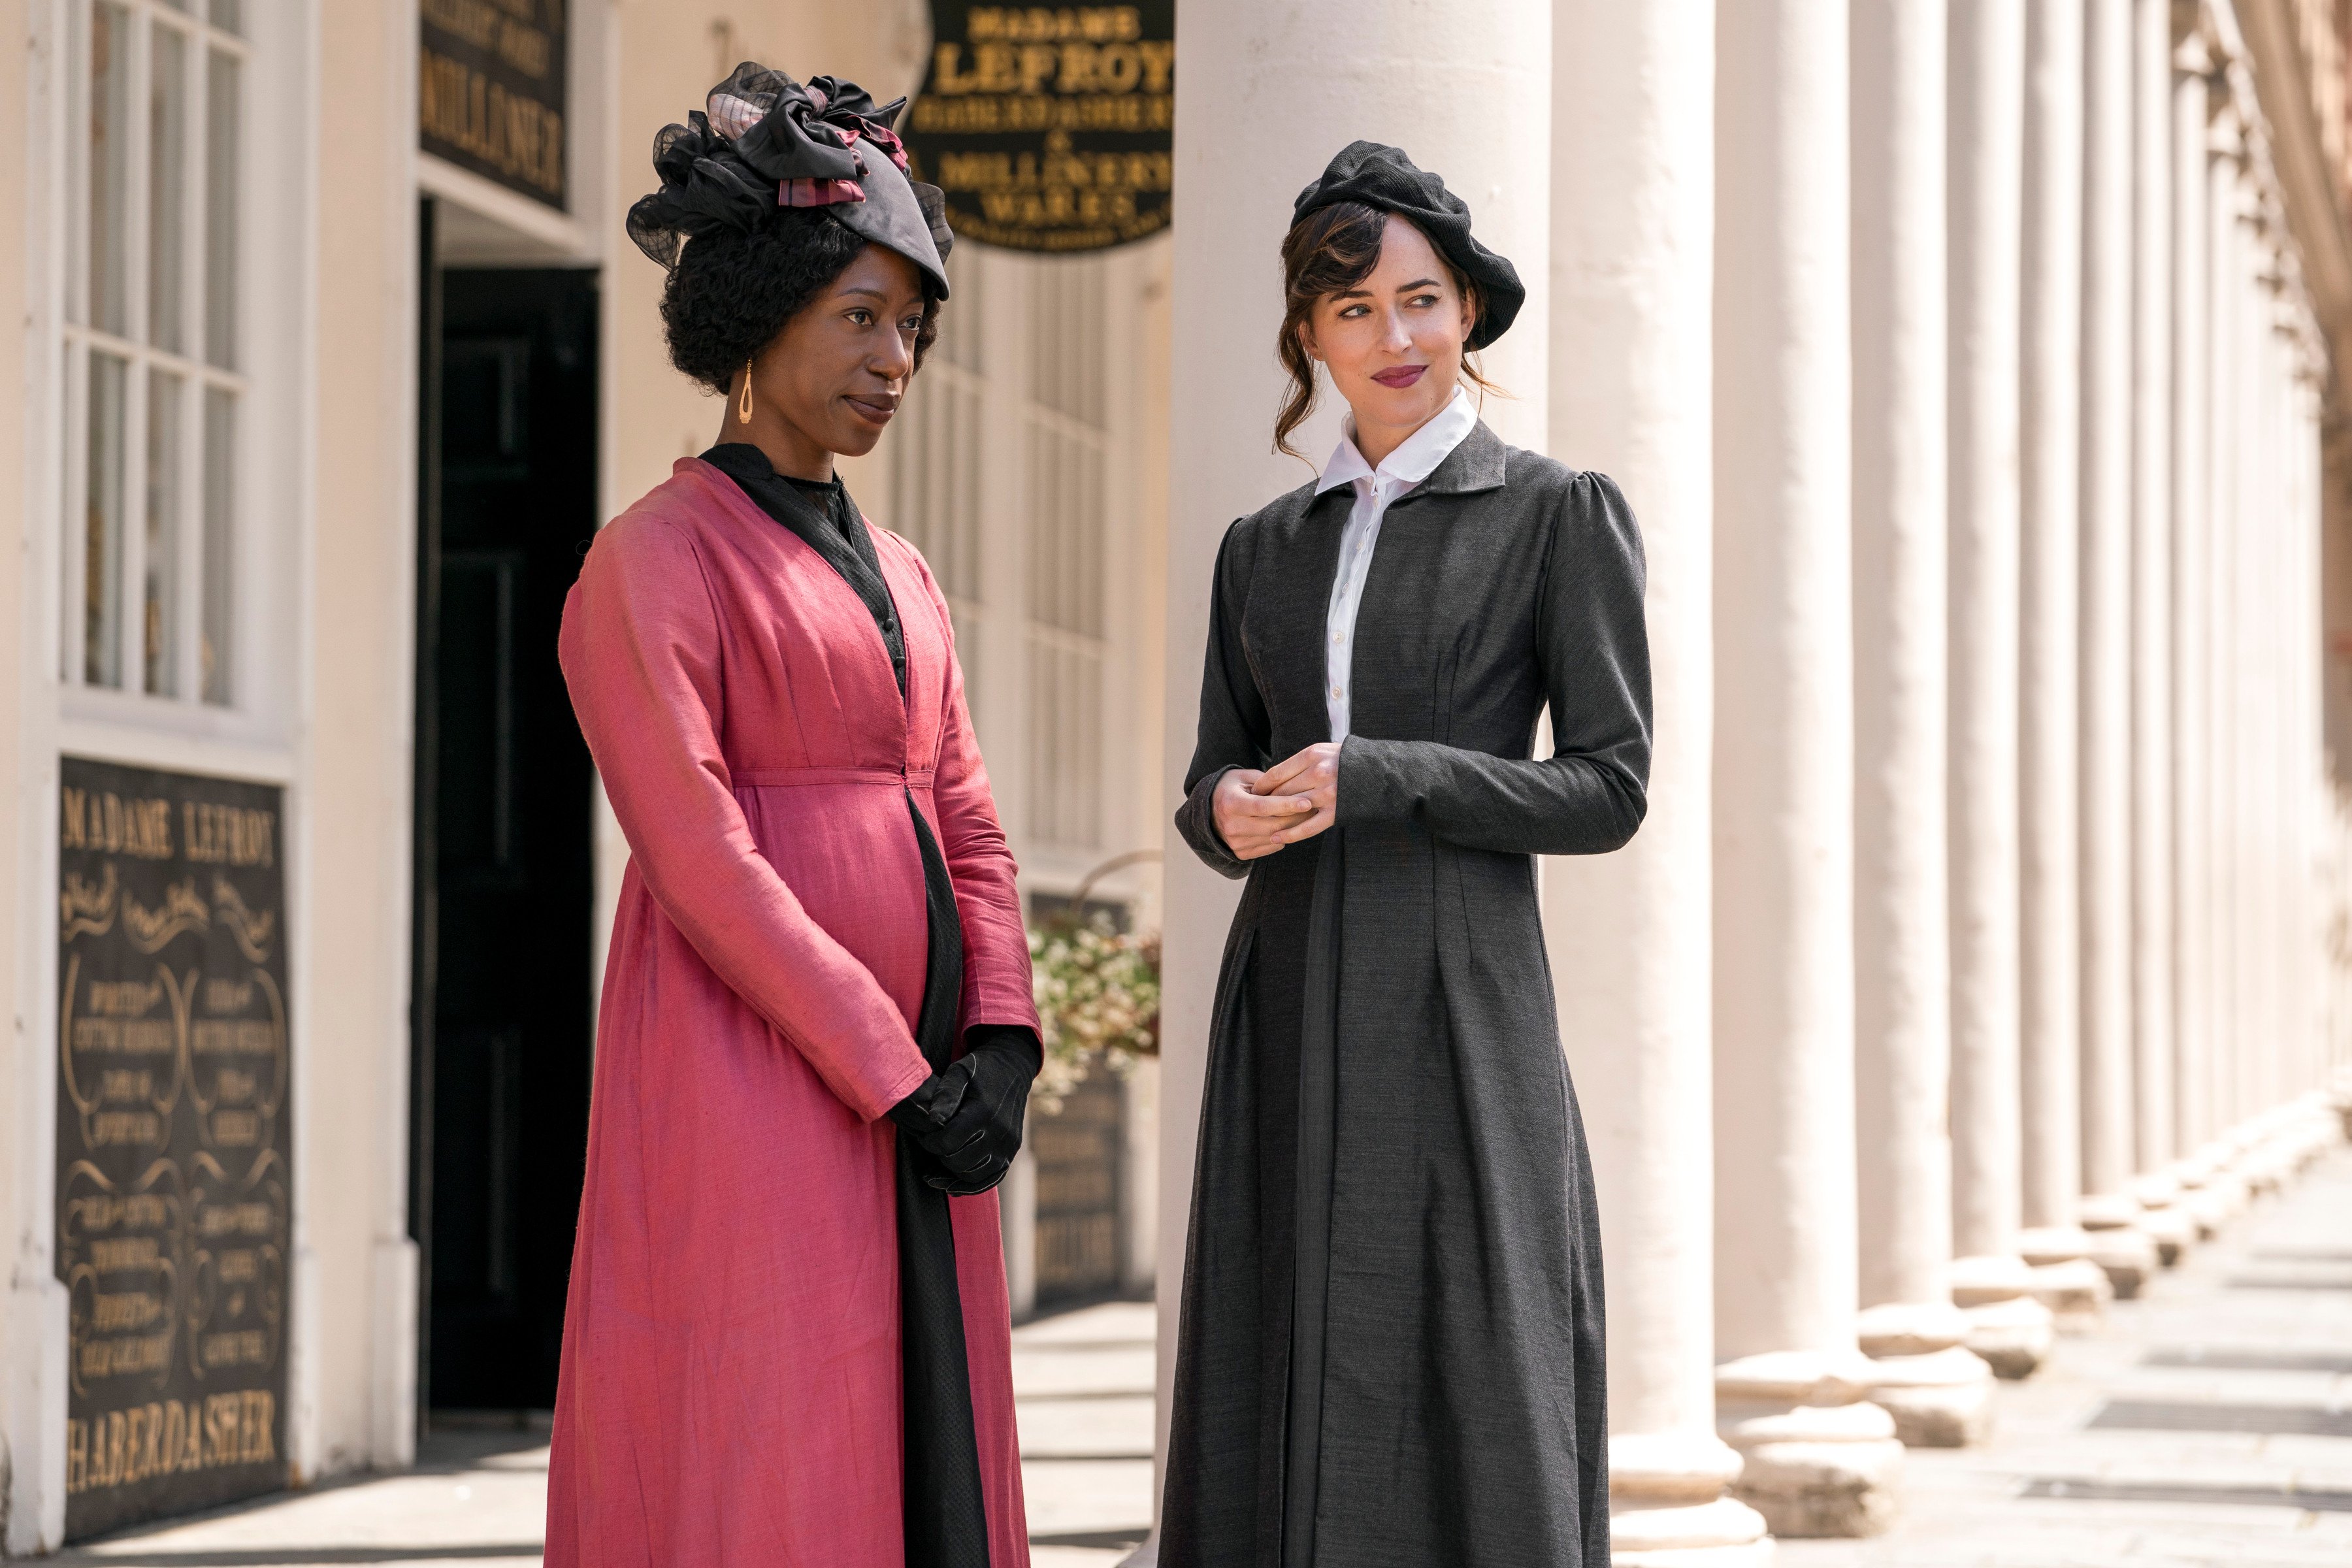 Dakota Johnson (right) as Anne Elliott and Nikki Amuka-Bird as Lady Russell in a scene from Persuasion filmed on the colonnaded Bath Street in Bath, southwest England. Photo: Nick Wall / Netflix